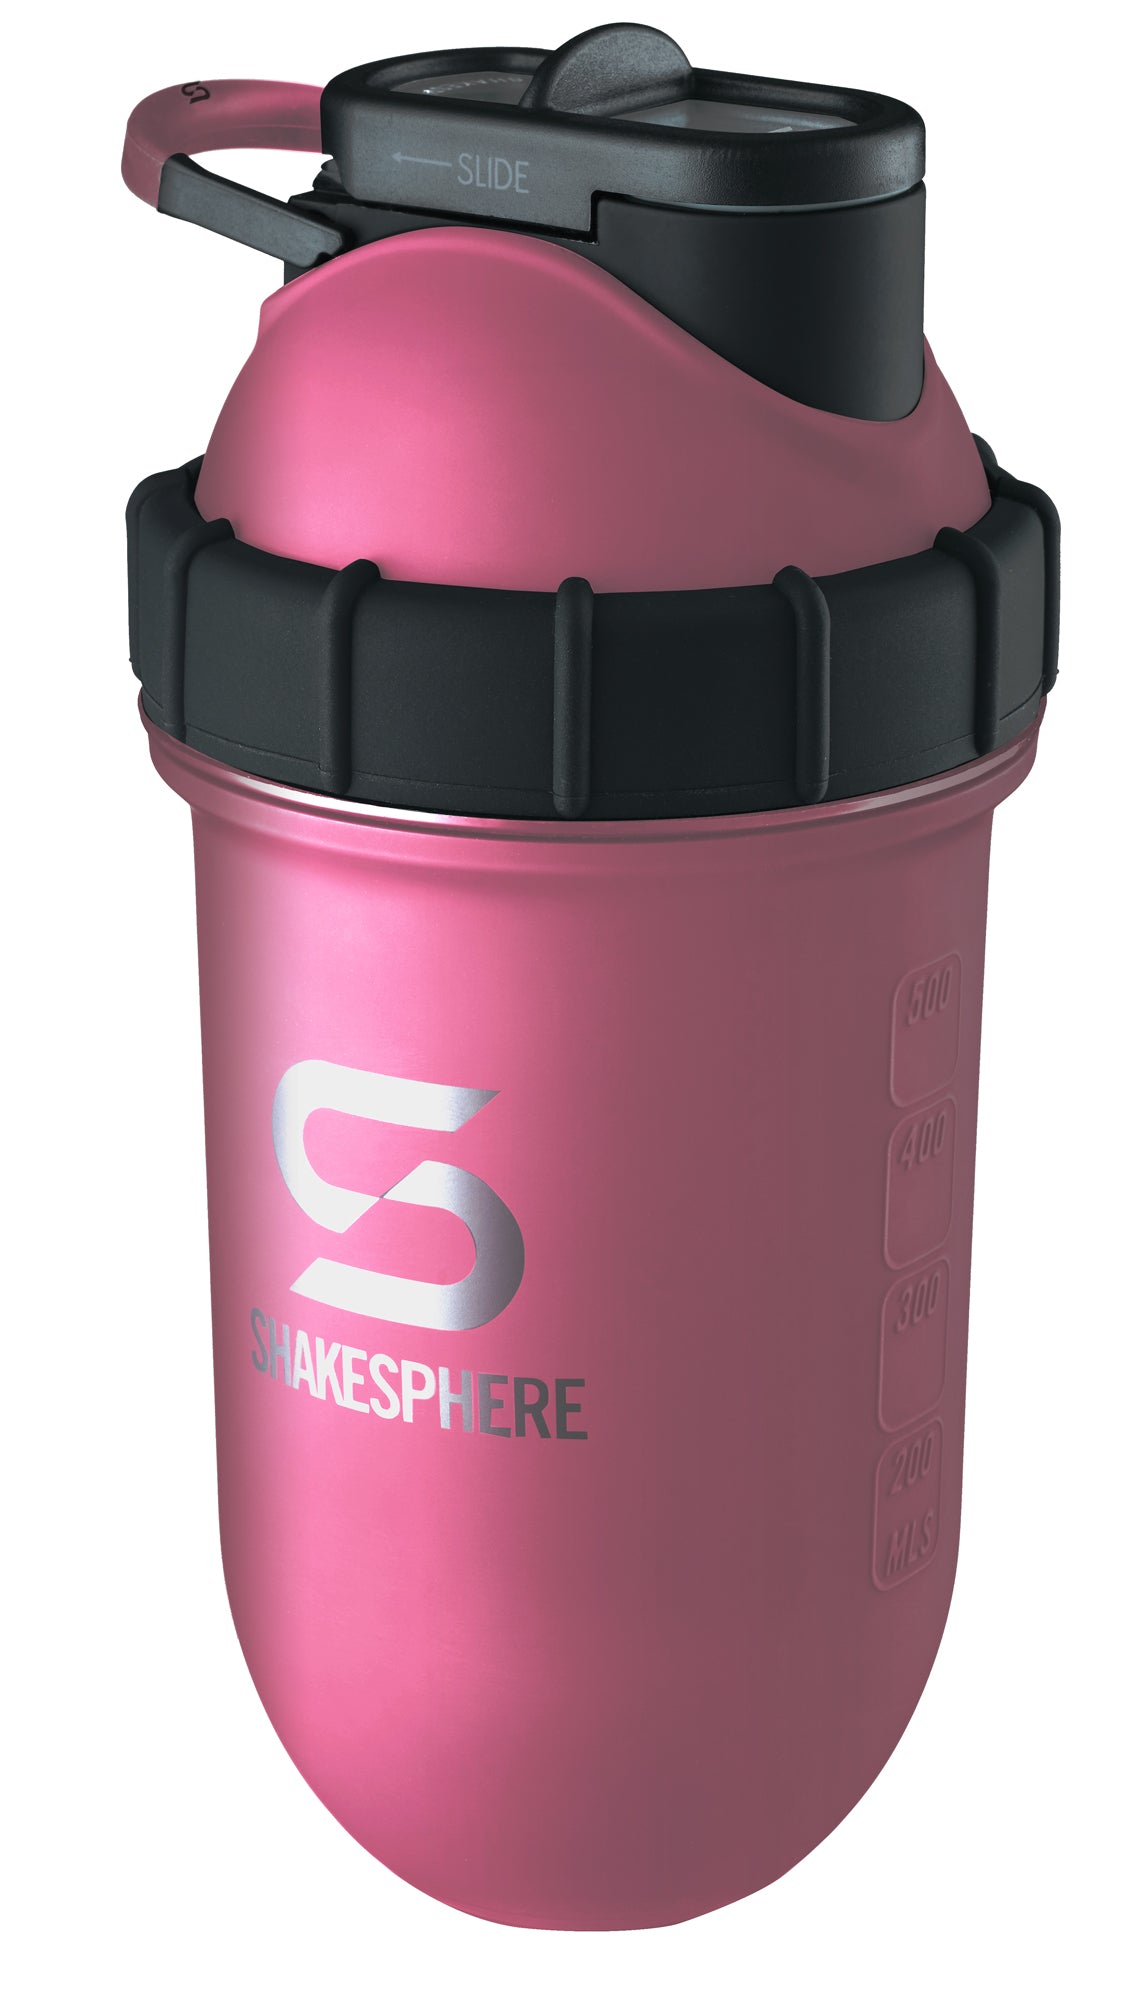 Protein Shaker Bottles with Storage – Page 2 – ShakeSphere US